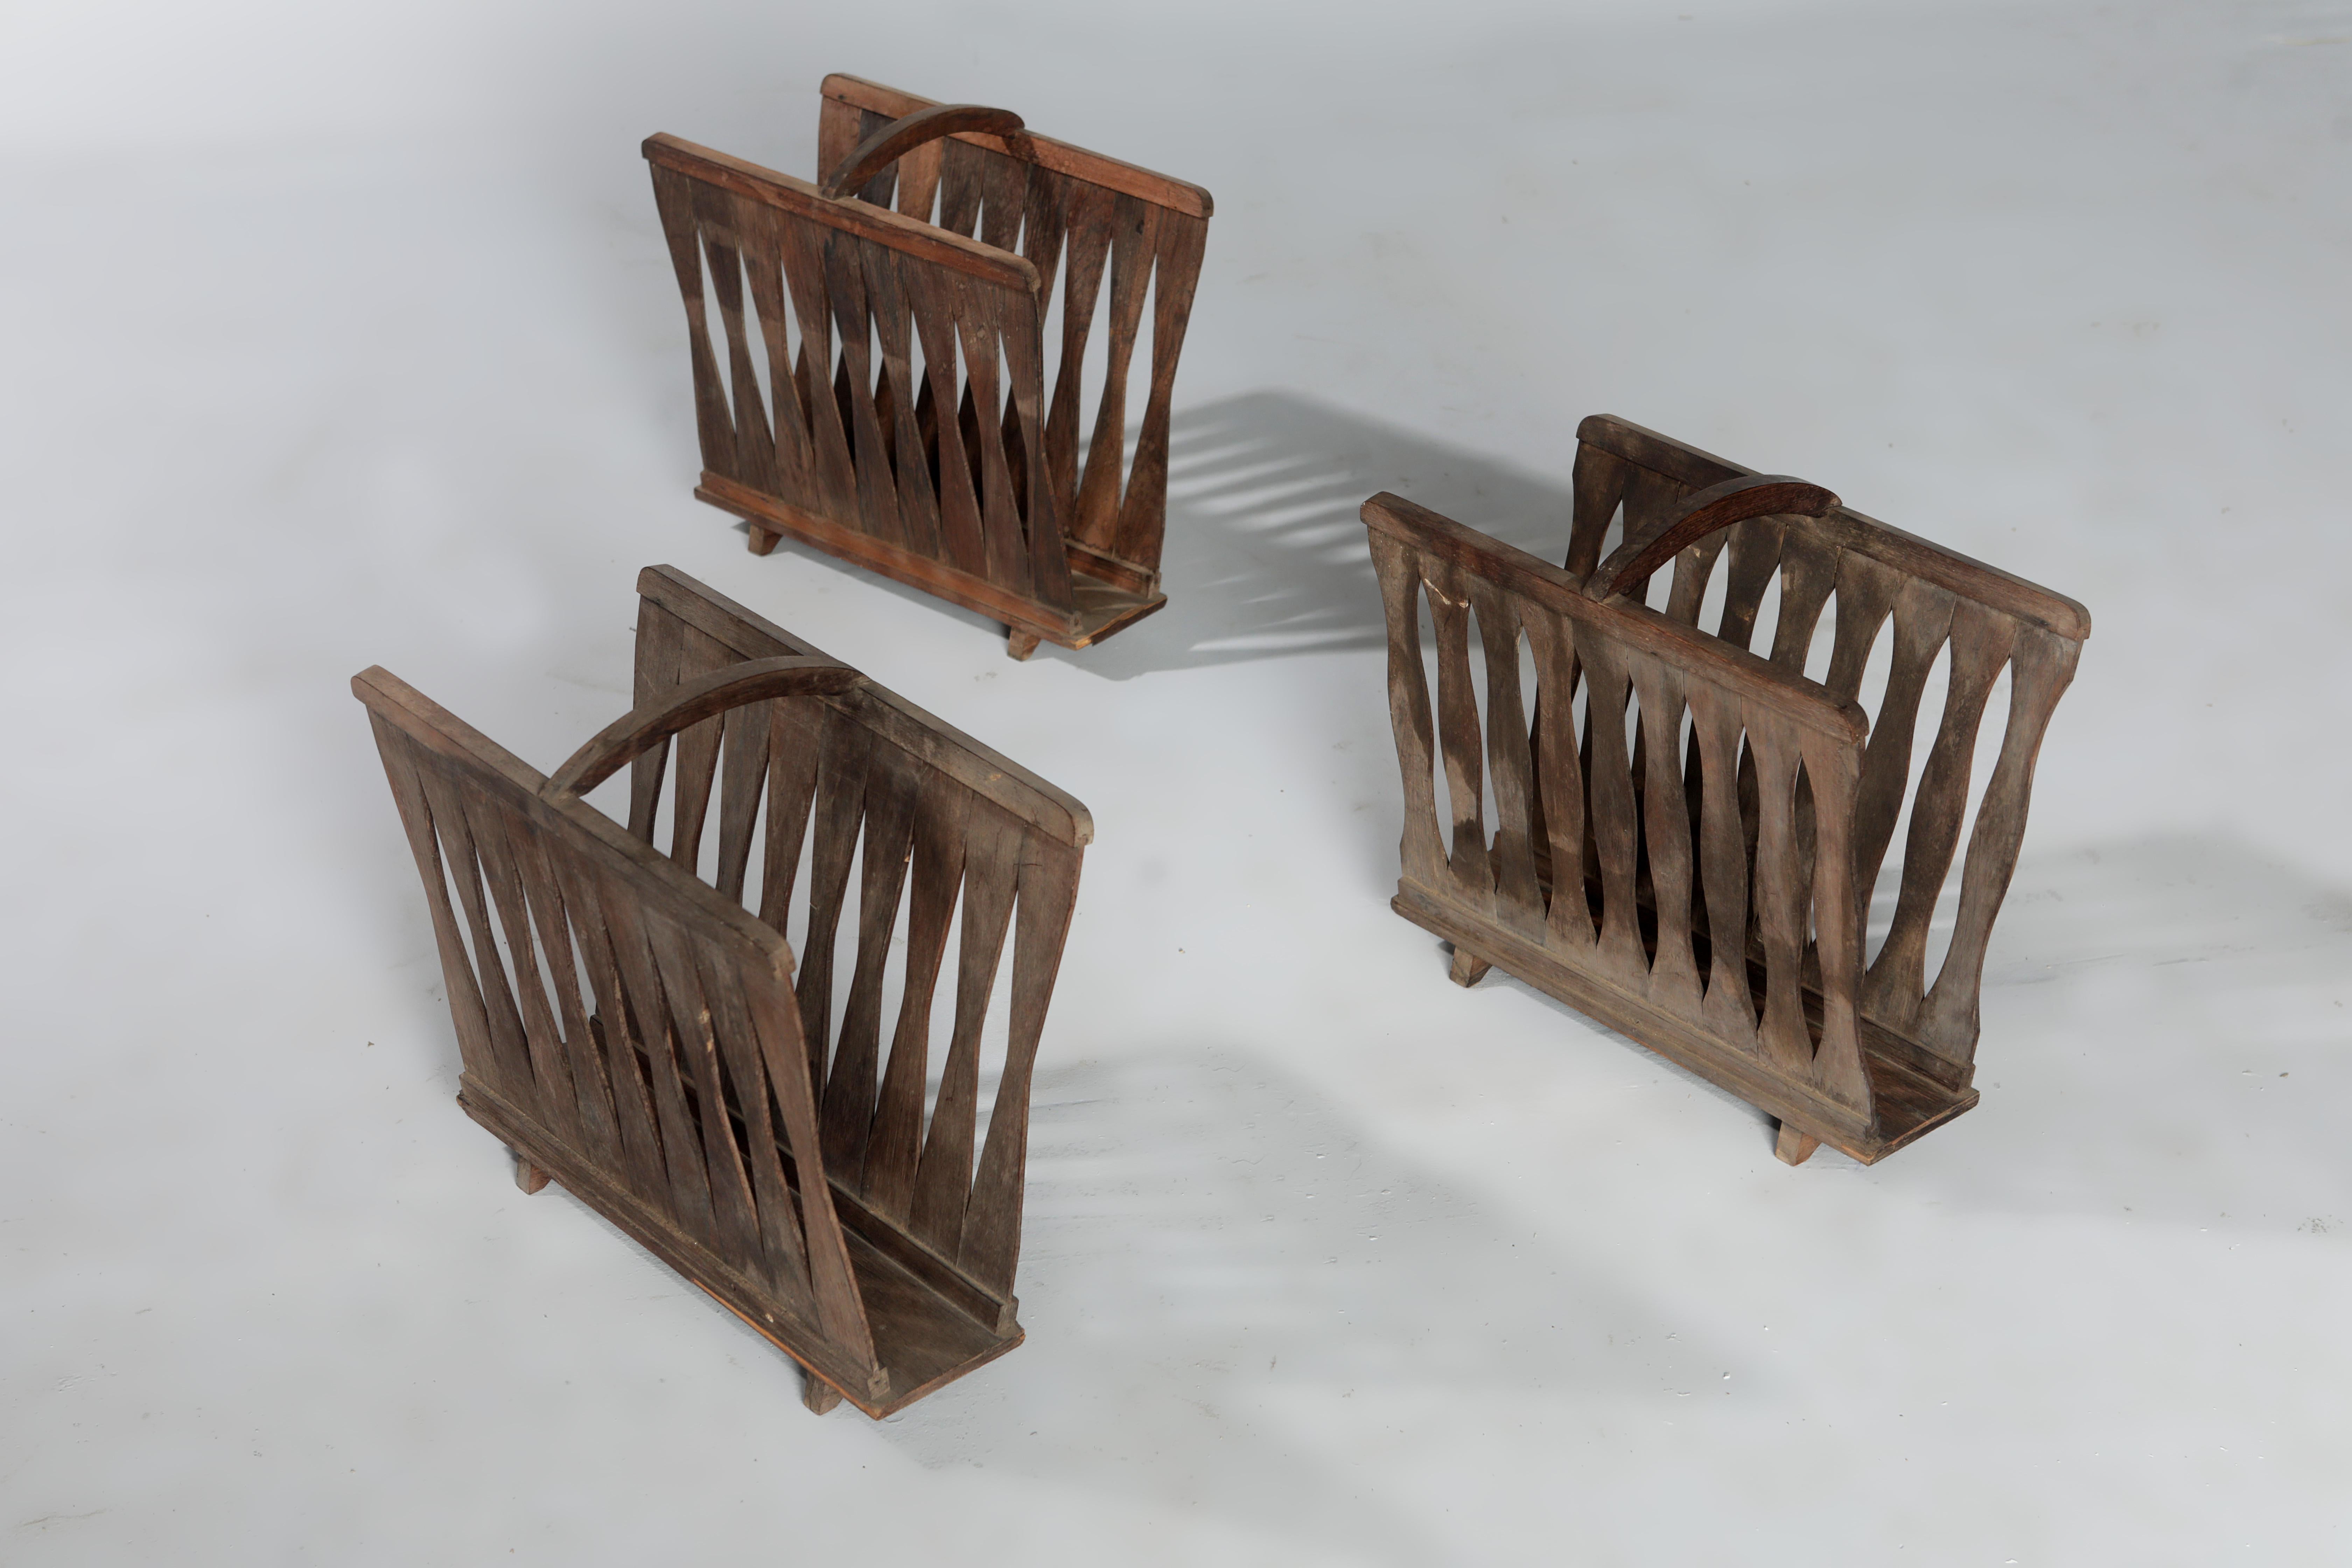 Set of three Mid-Century Modern wooden magazine racks by Brazilian Designer, 1950s.

Made of solid wood and finished with varnish, this piece is part of a set of magazine racks and other pieces by unknown Brazilian artists from the 50's.